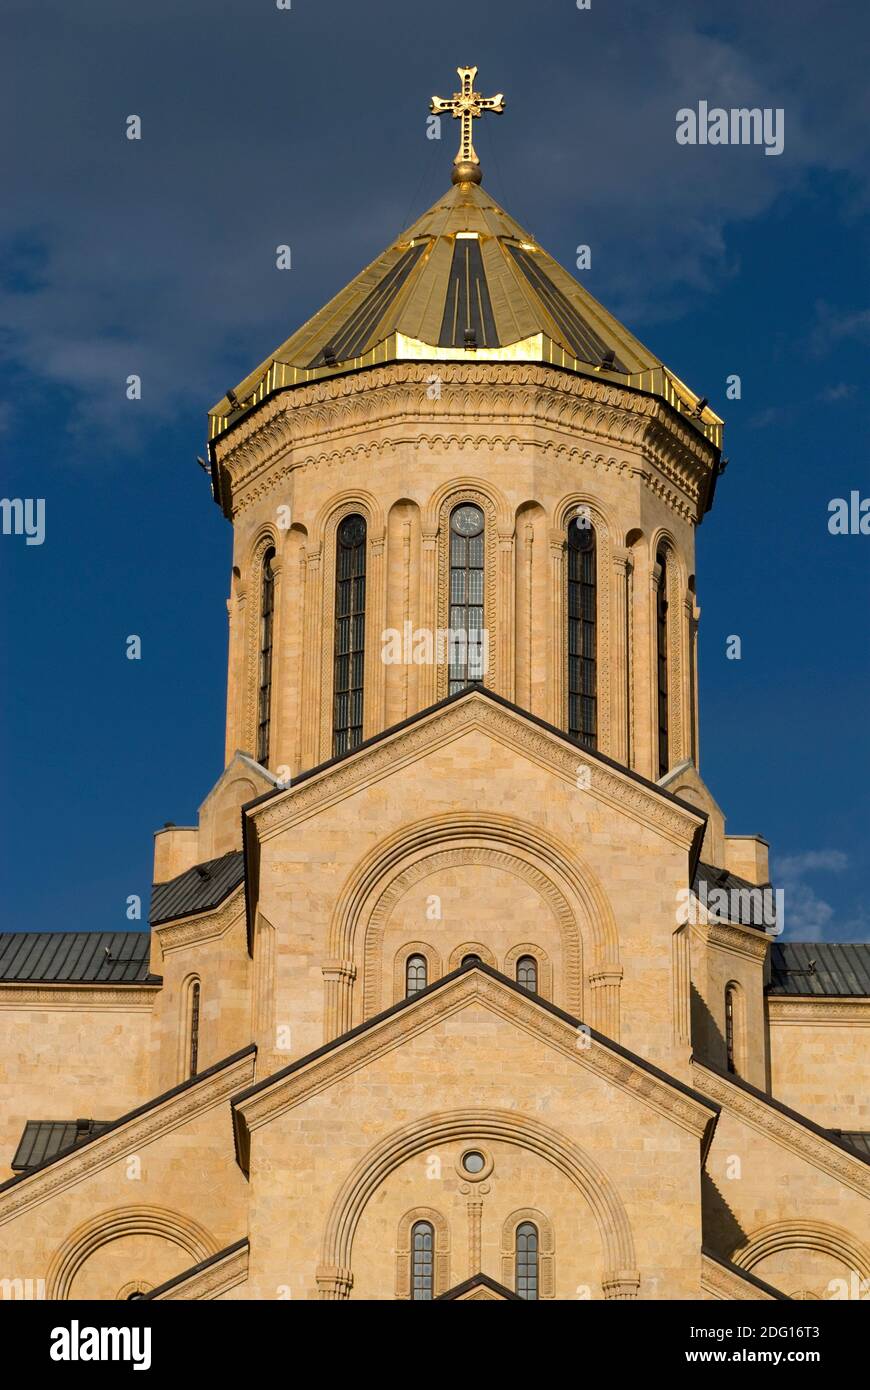 The Tbilisi Holy Trinity Cathedral commonly known as Sameba is the main Georgian Orthodox Christian cathedral, located in Tbilisi, Georgia Stock Photo